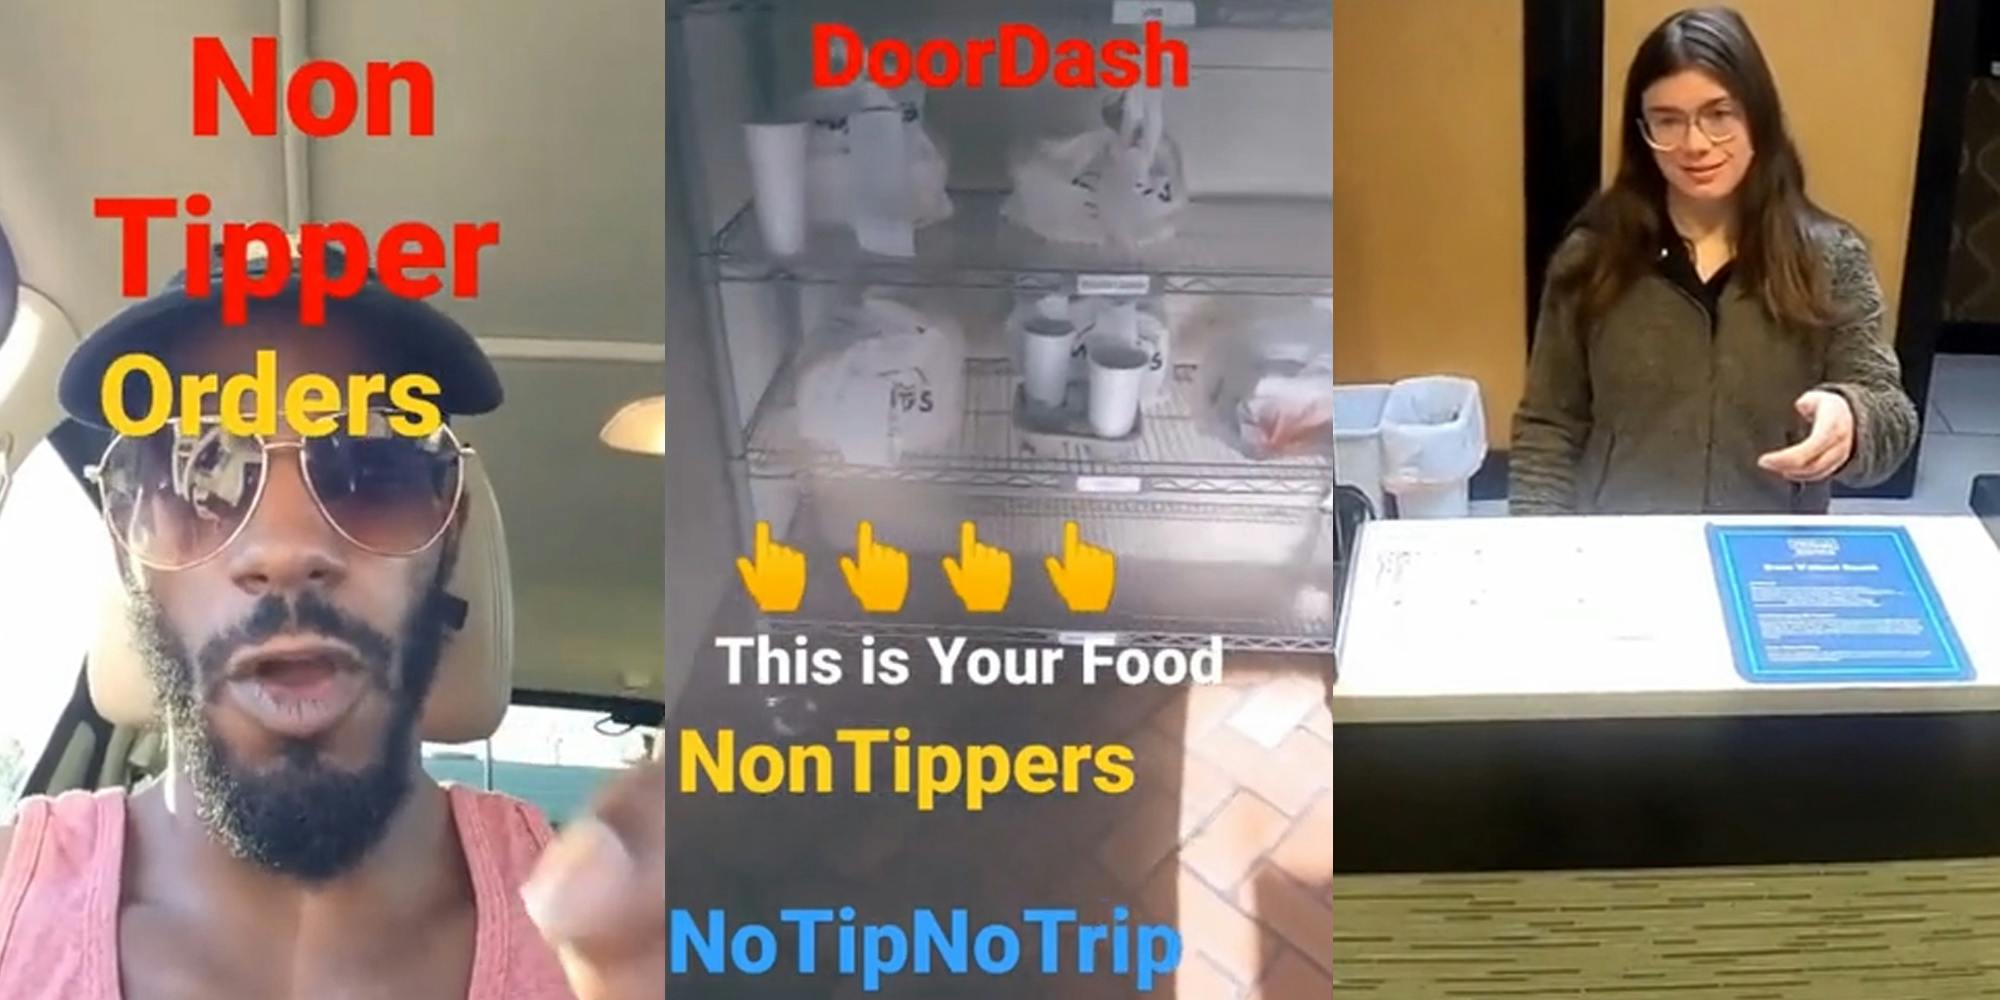 DoorDash driver speaking in car with caption "Non Tipper Orders" (l) DoorDash food on shelf with caption "DoorDash This is Your Food NonTippers NoTipNoTrip" (c) woman with hand out over counter (r)